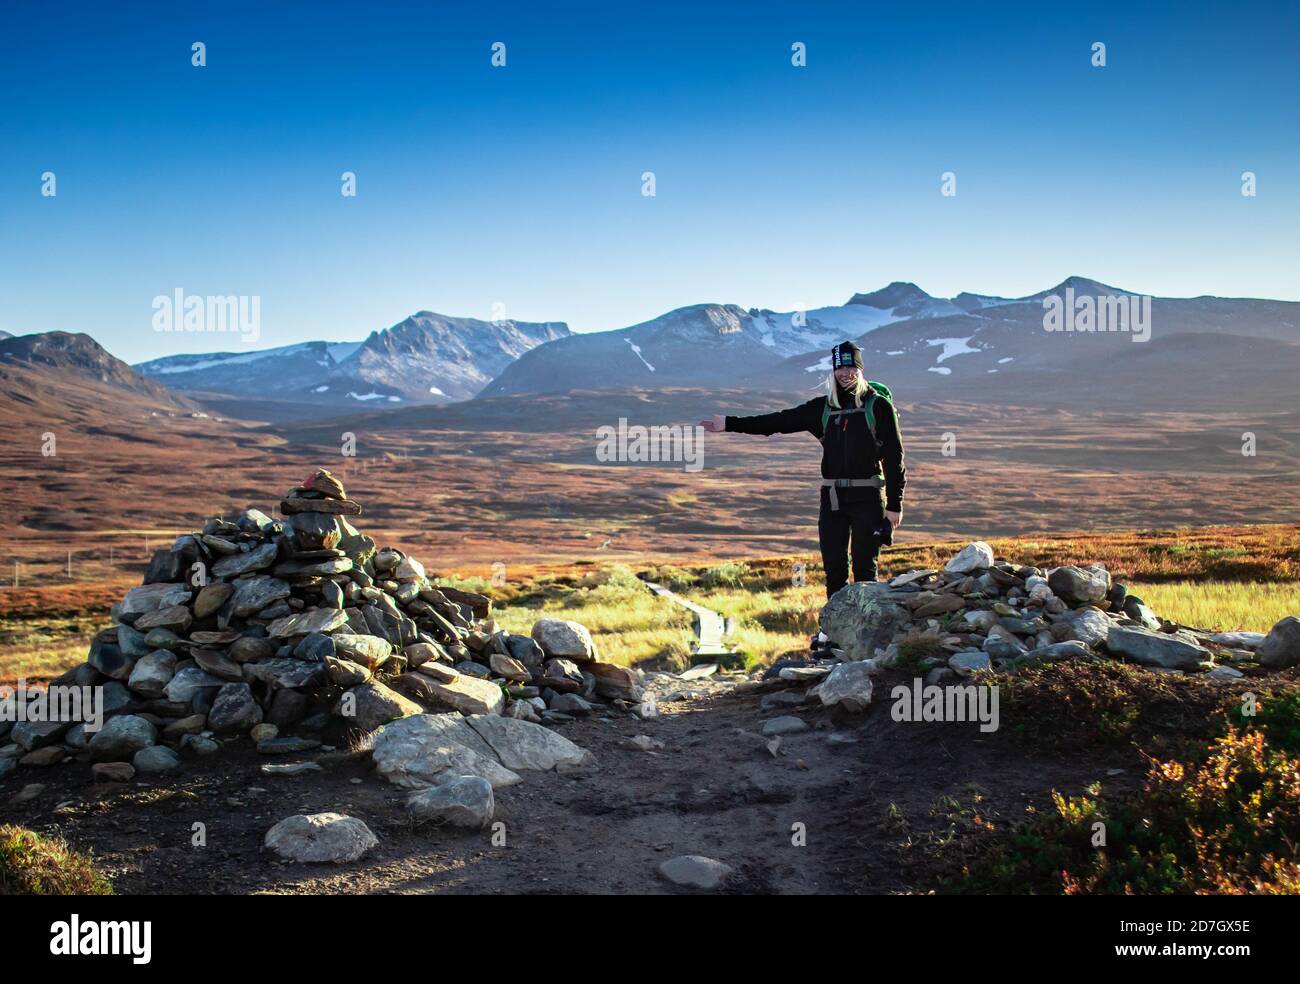 Me and a friend hiking the swedish mountains in jämtland with our dogs Stock Photo